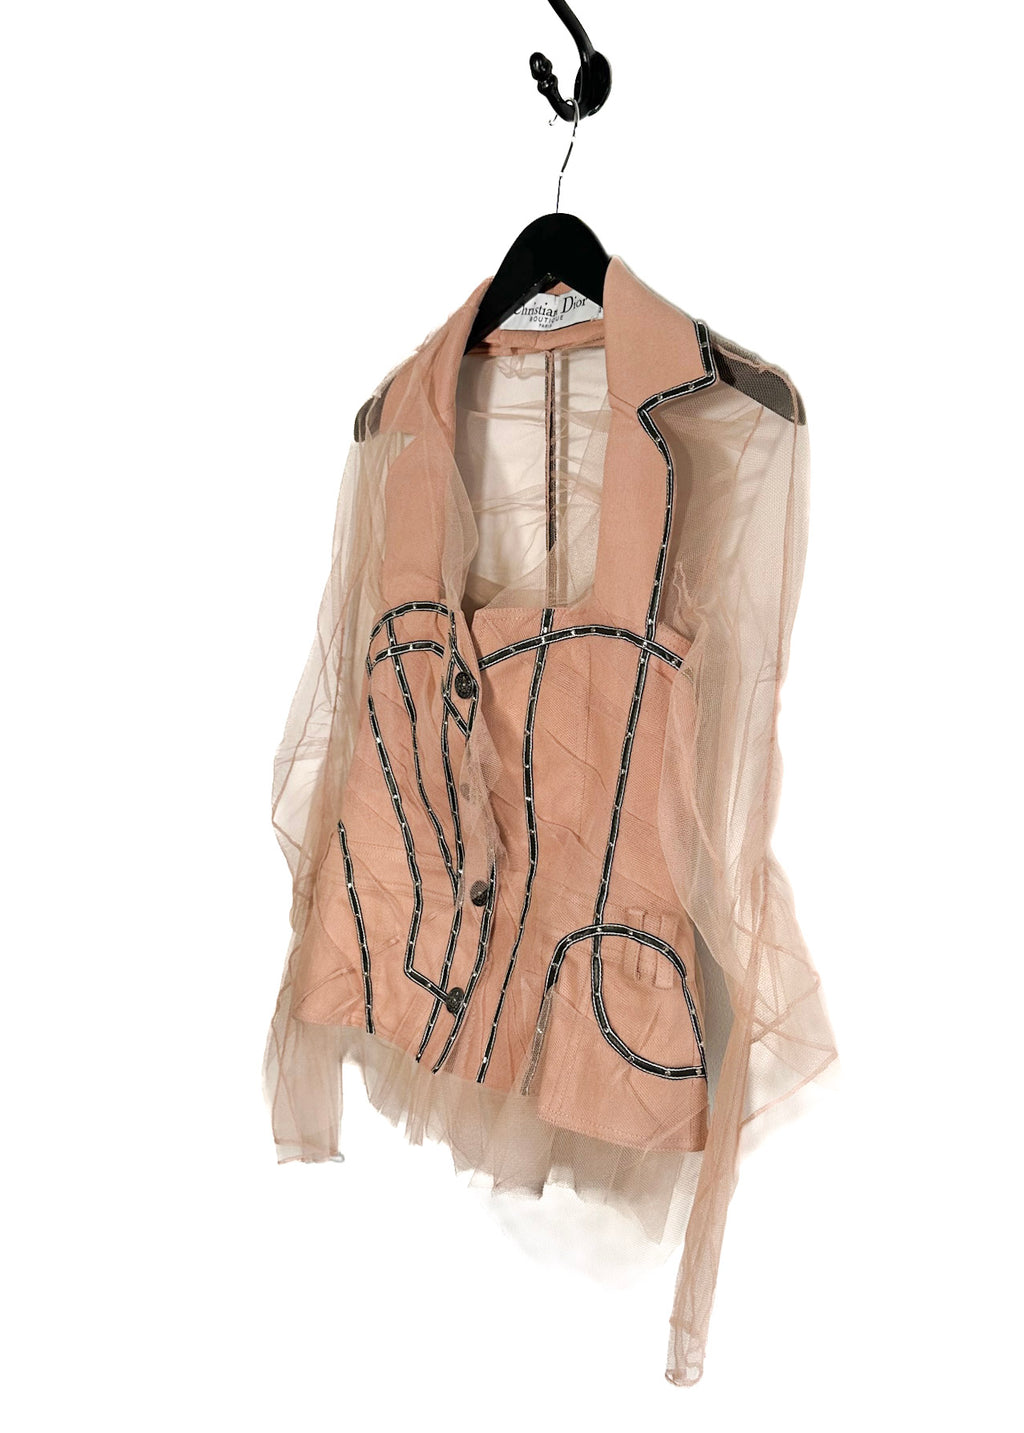 Christian Dior SS06 Nude Deconstructed Mesh Overlay Jacket